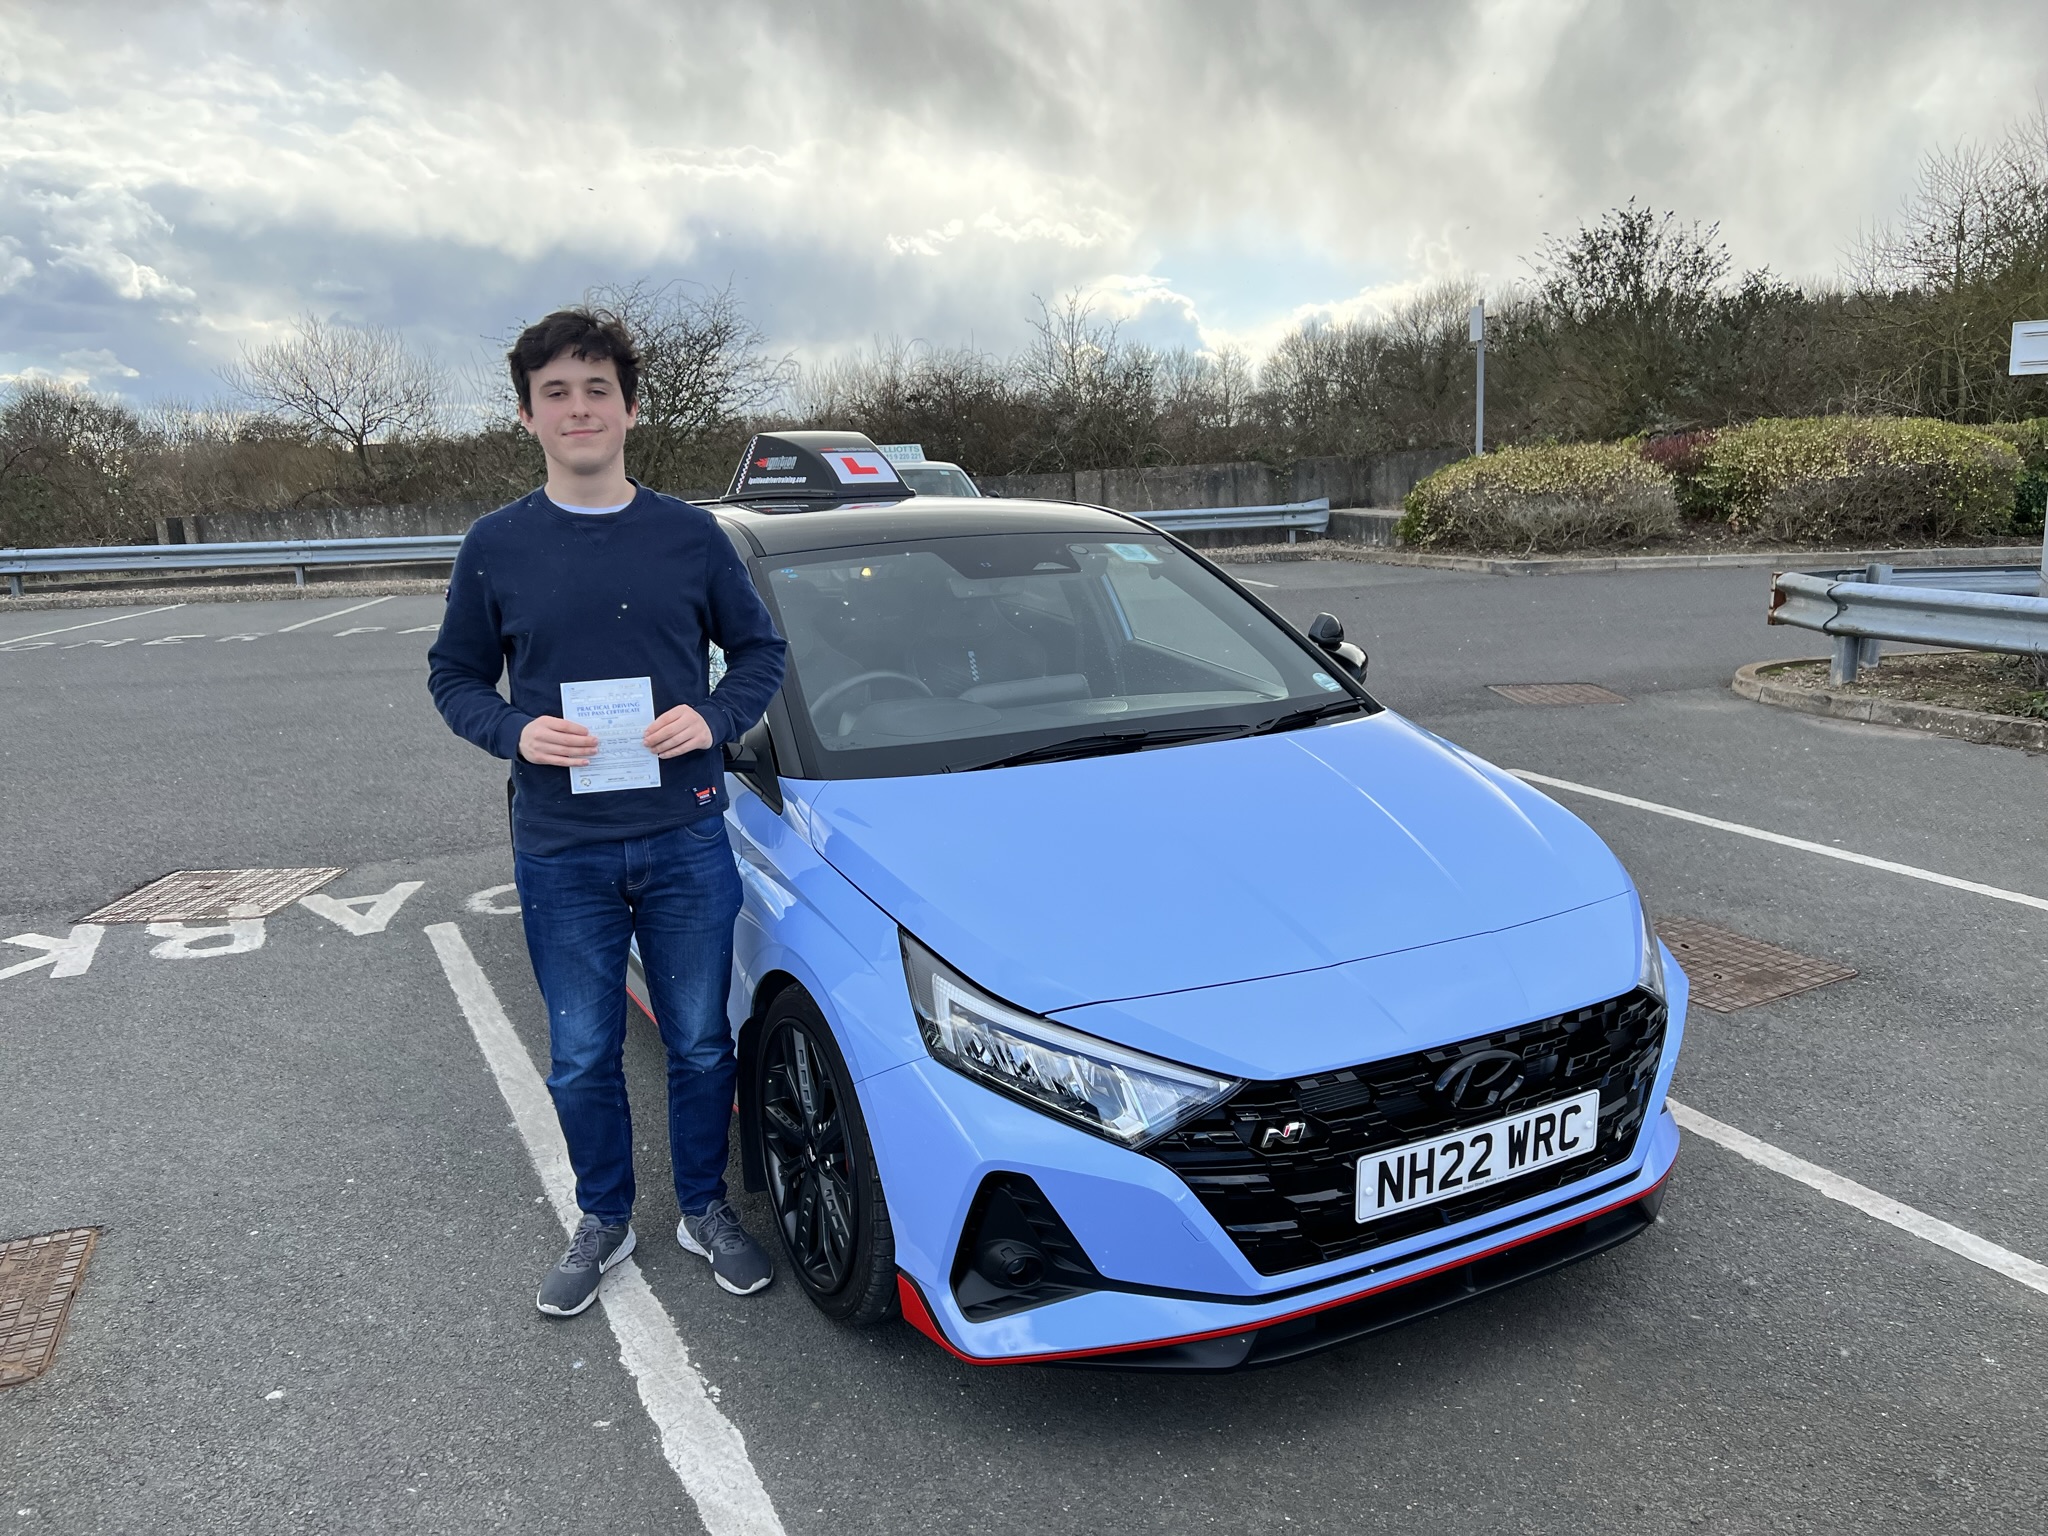 Adam passed first time!